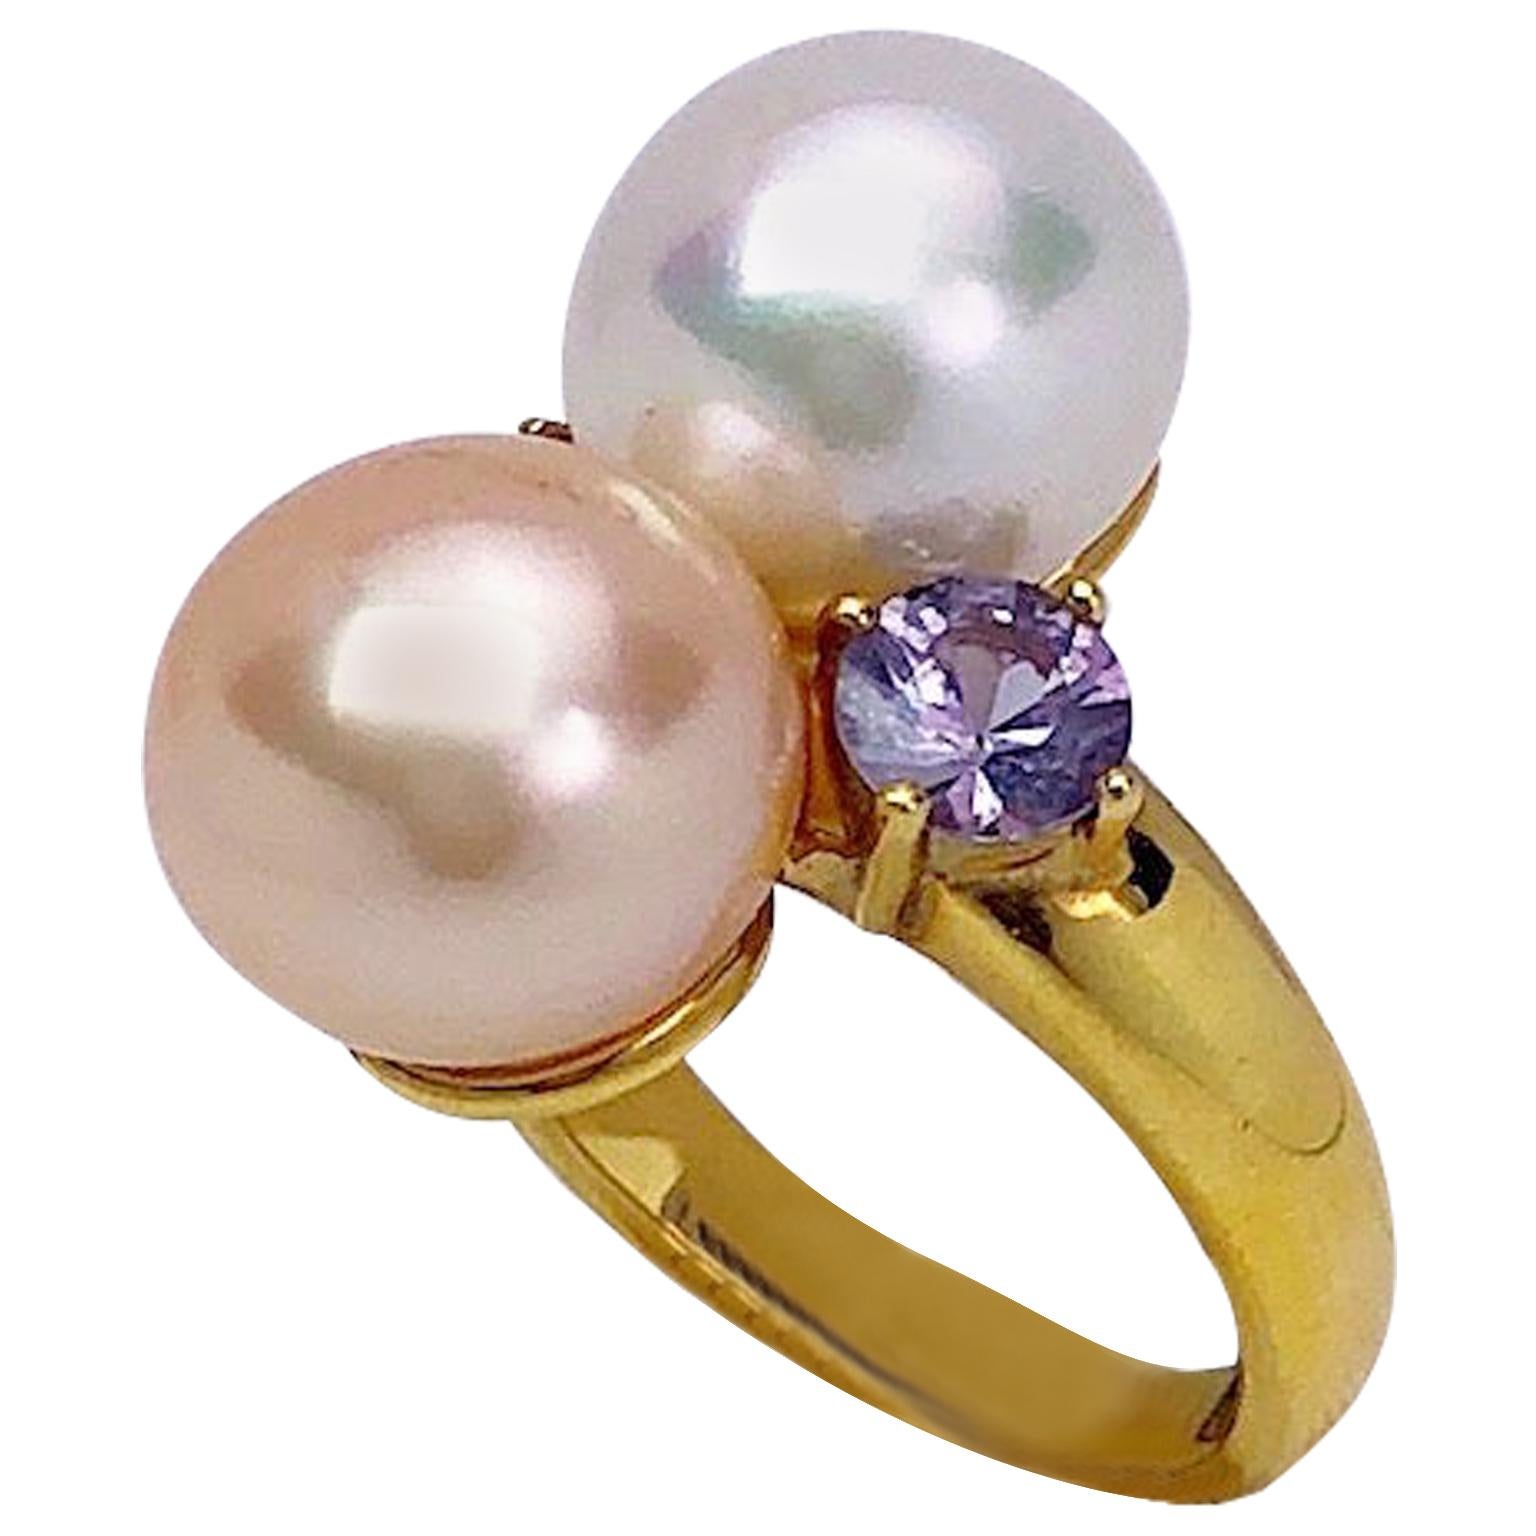 Schoeffel 18 Karat Yellow Gold Pearl Ring with Pink and Lavender Sapphires